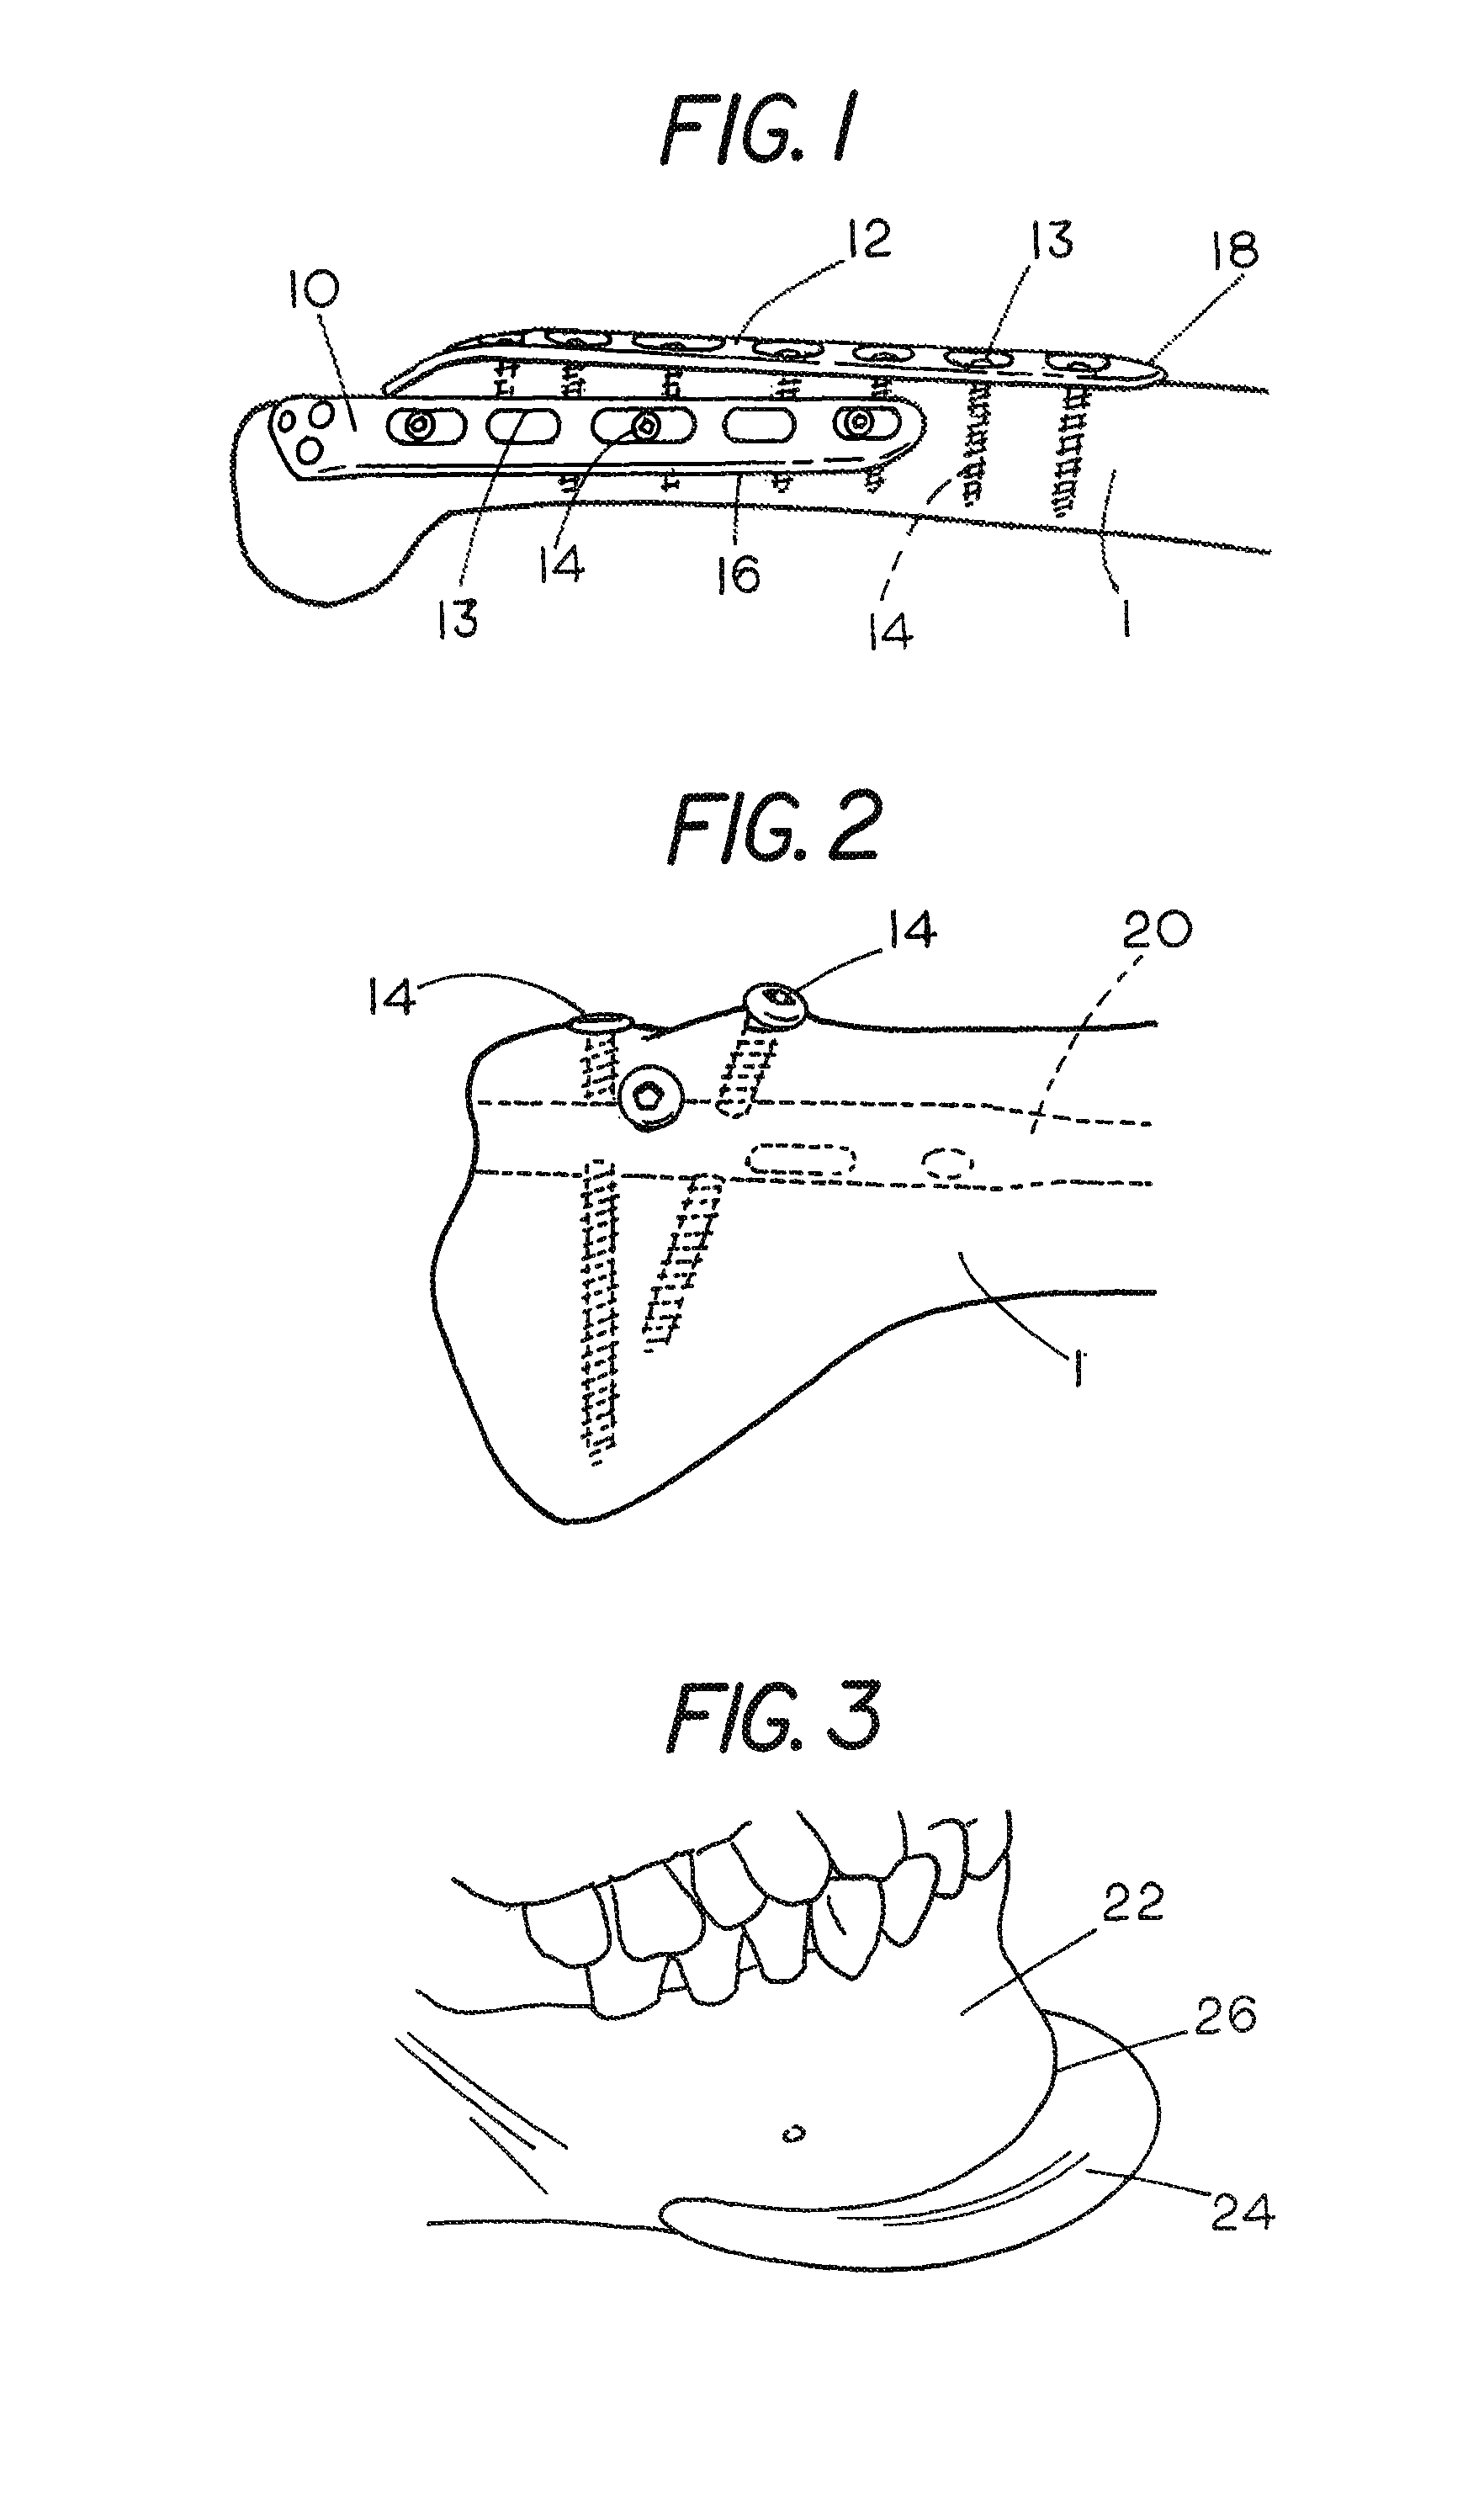 Moldable cushion for implants